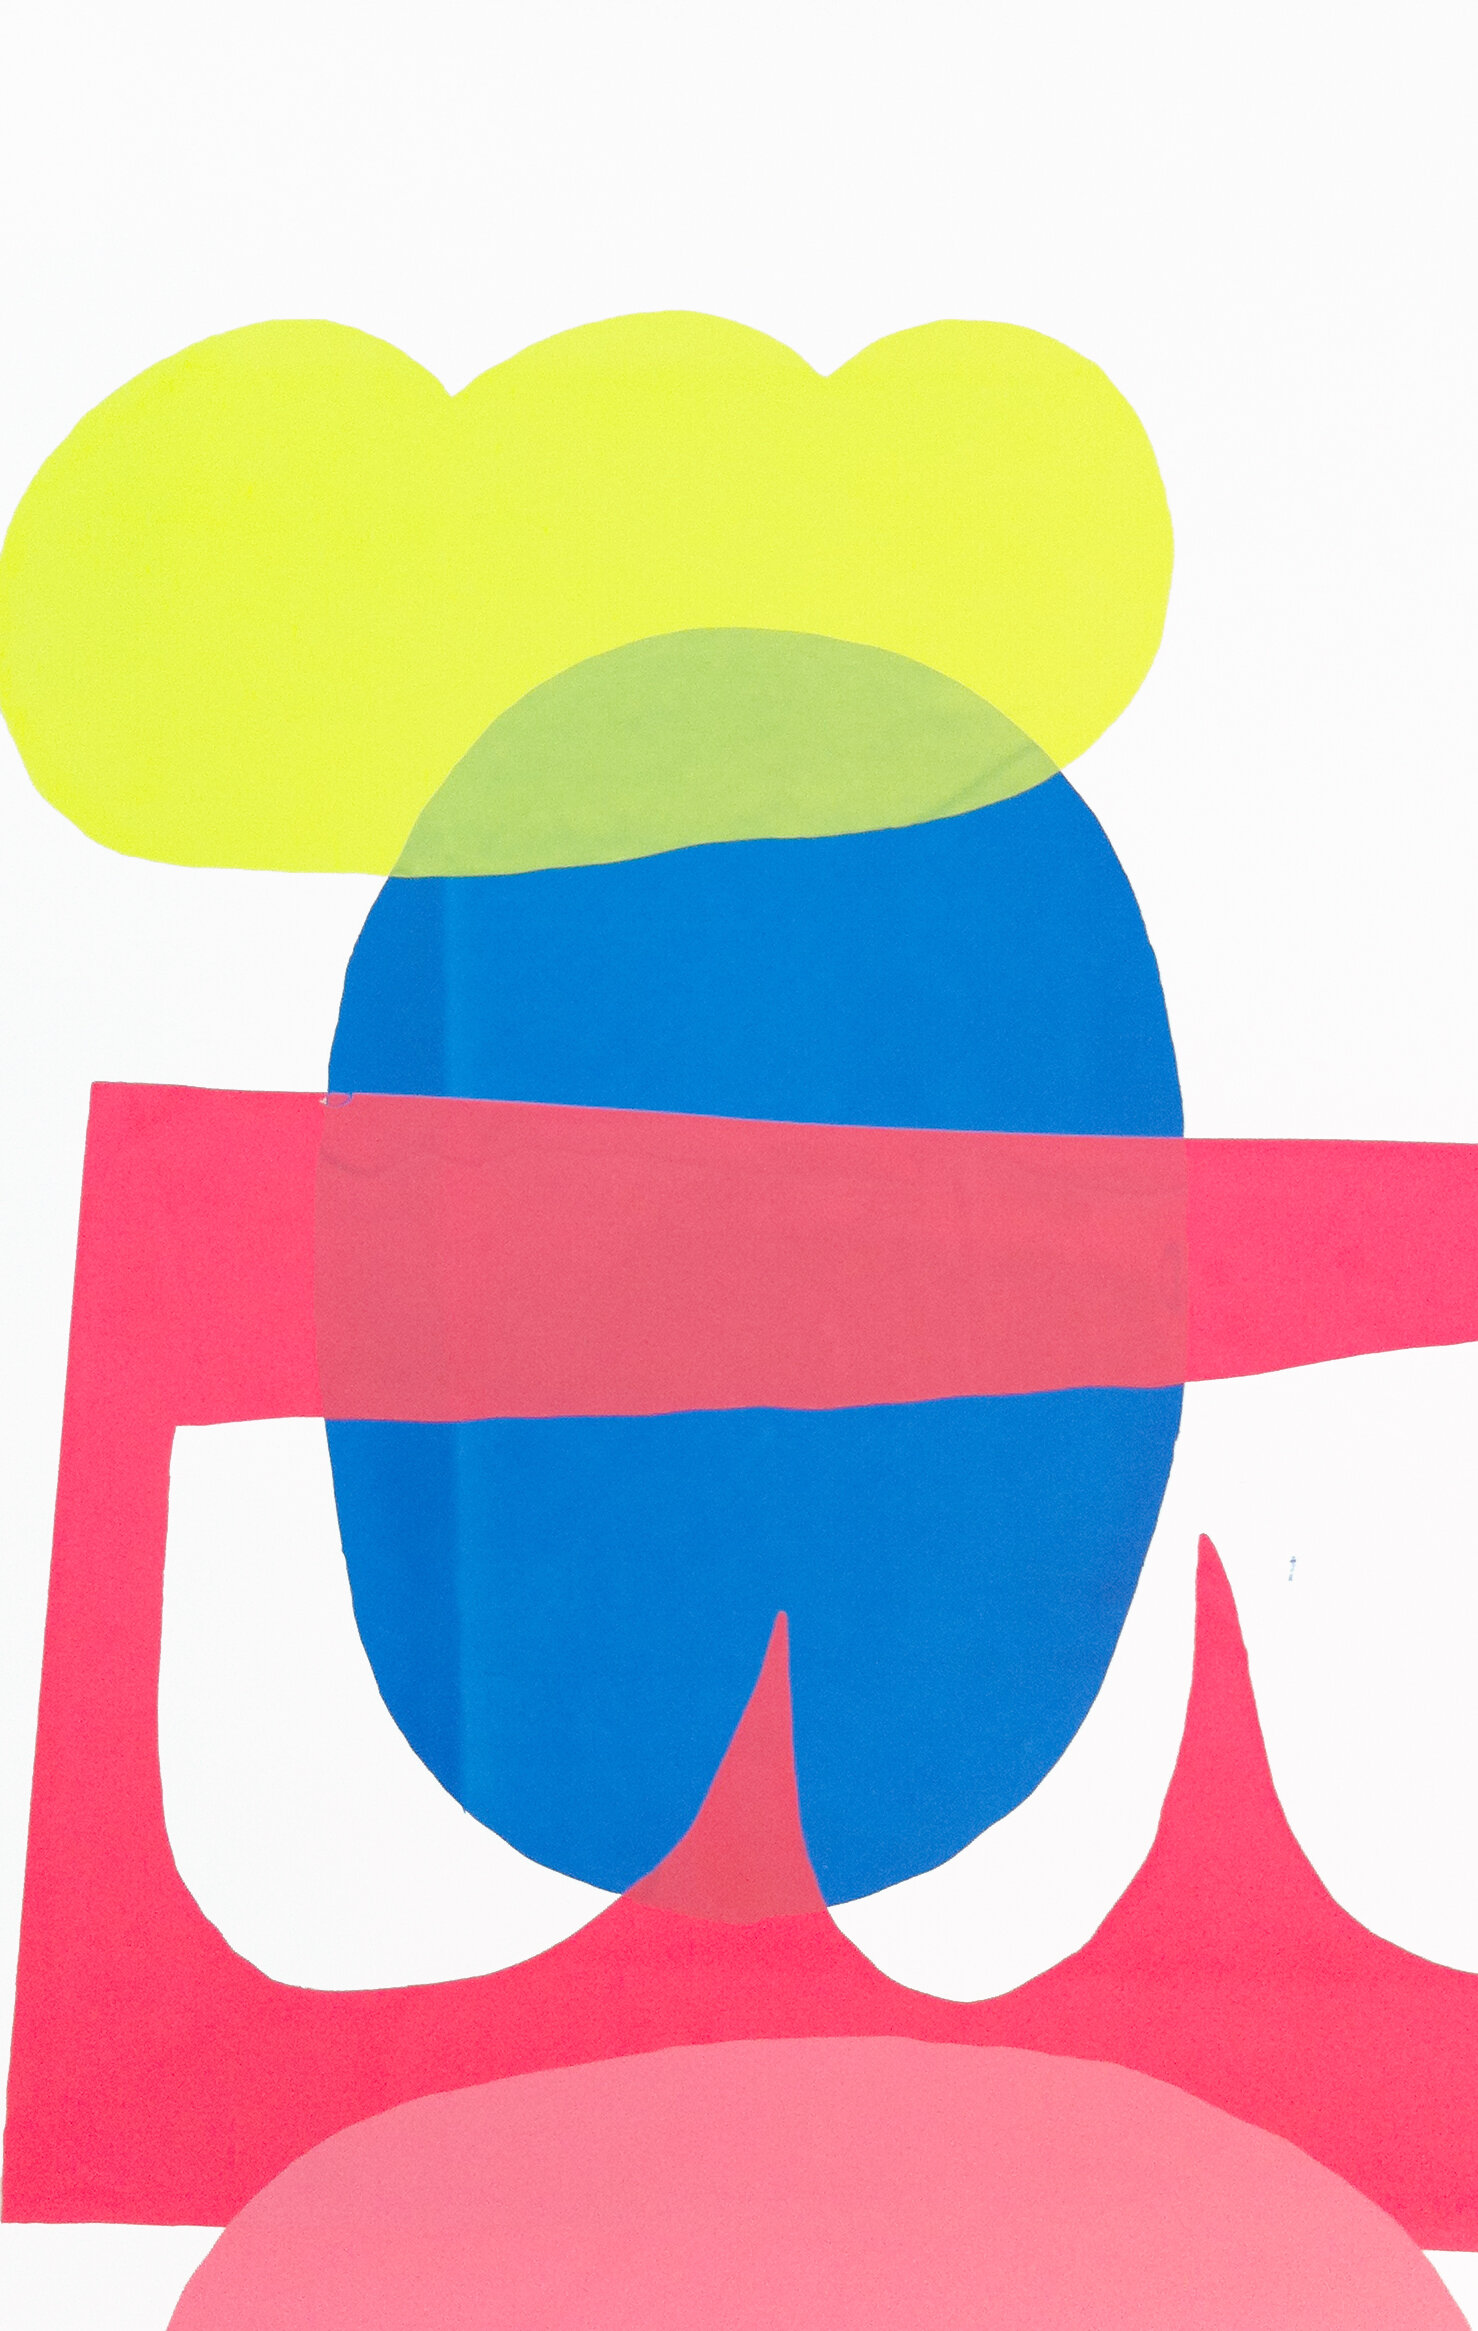    Shapes 1  , 2013  Monoprint, Silkscreen ink on paper  40 x 26 in. 